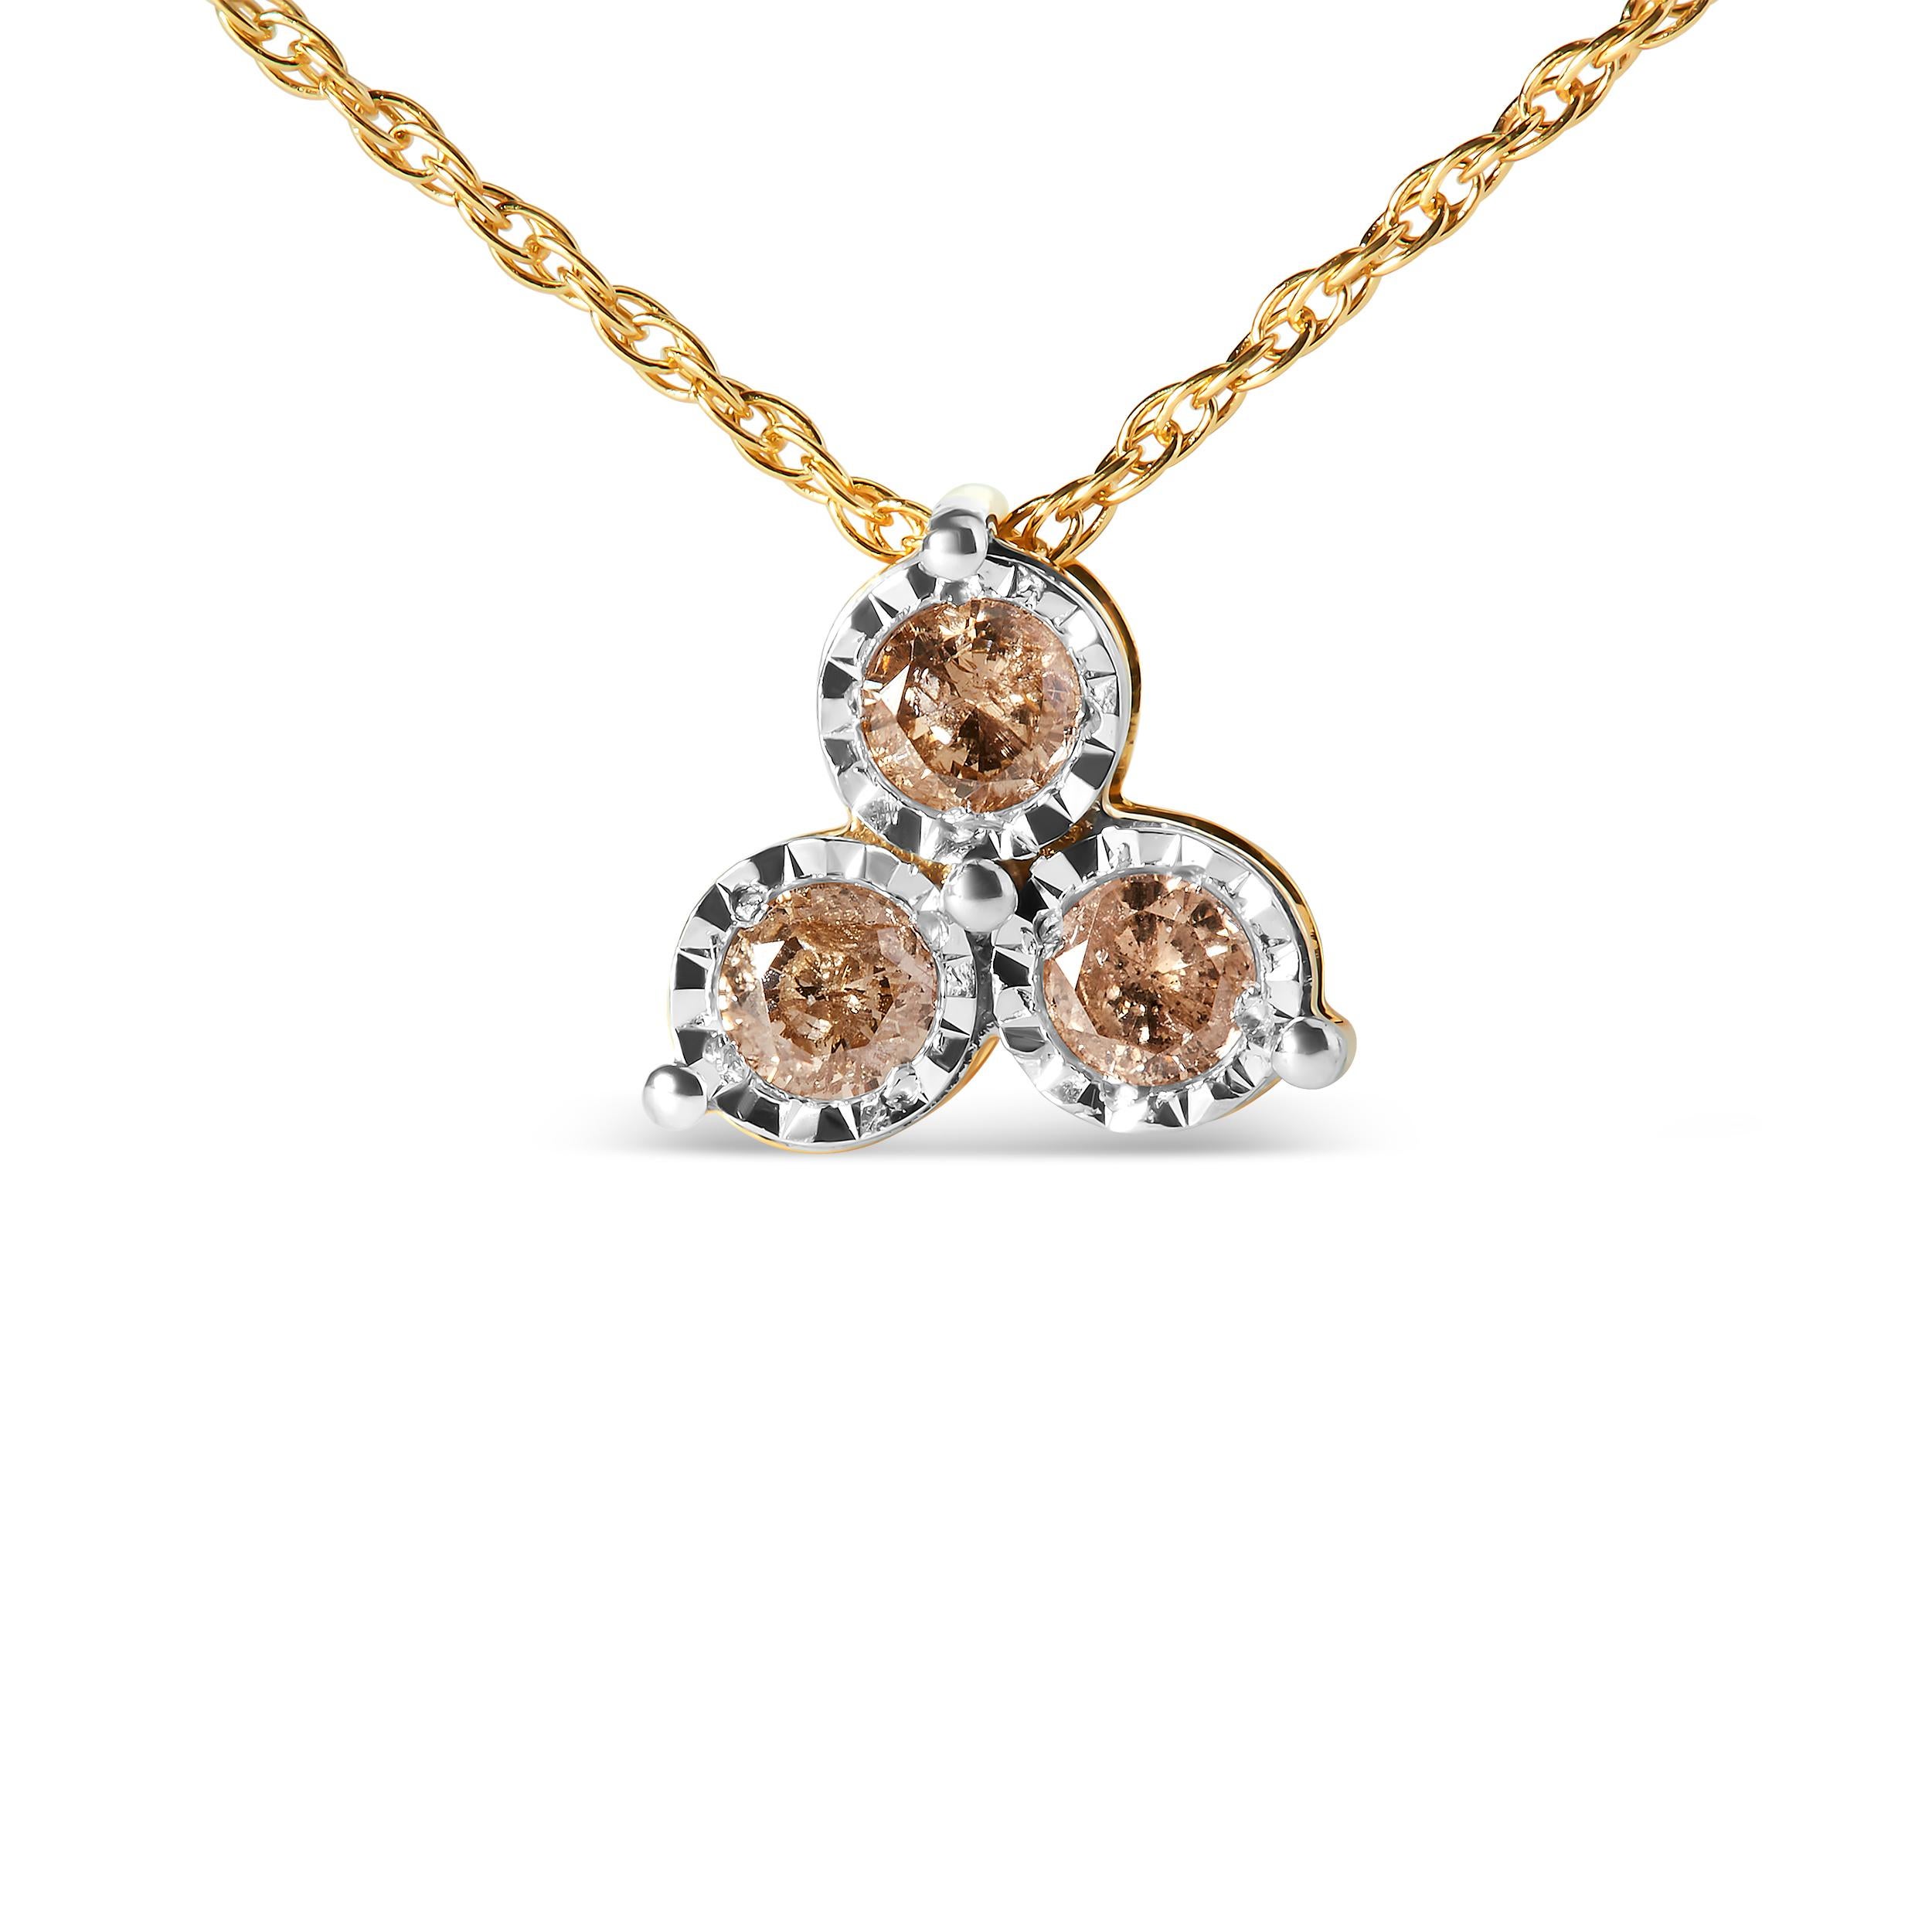 Embrace timeless elegance with our 14K yellow gold-plated .925 sterling silver pendant necklace, adorned with a trio of natural diamonds. Three round-cut diamonds, totaling 1/4 carat, dance within prong settings, exuding brilliance at every turn.